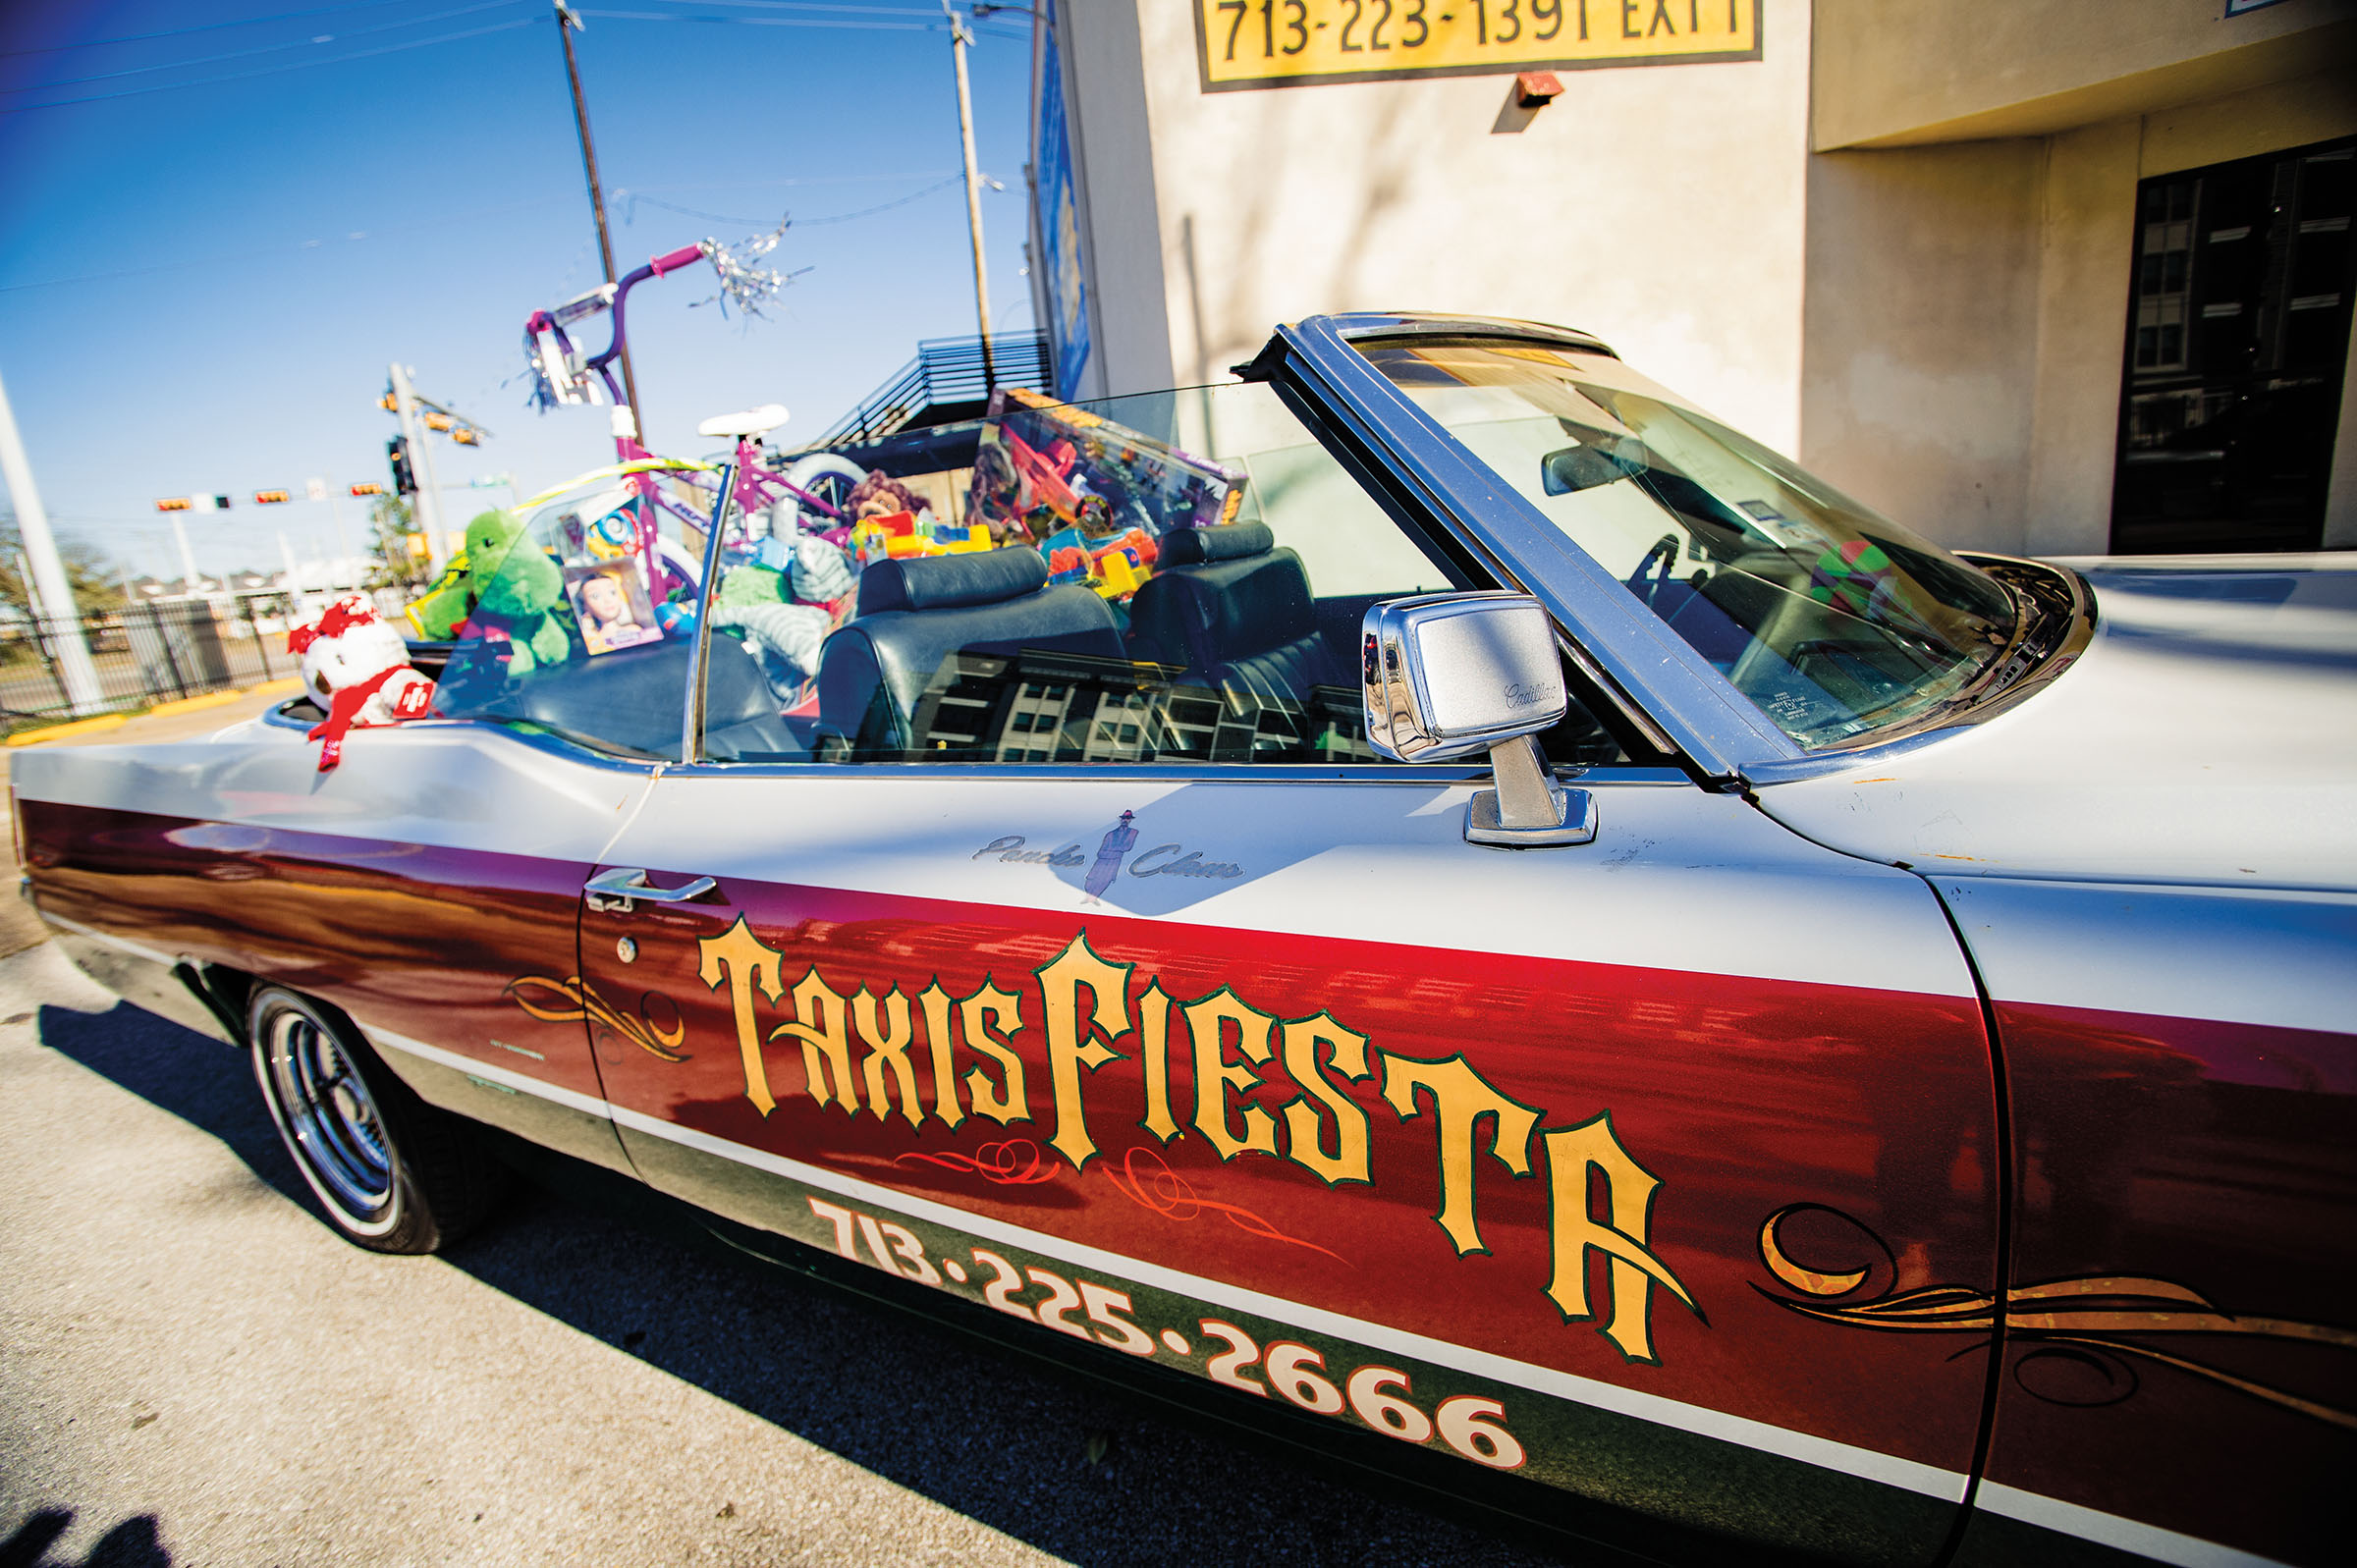 A long red and white convertible with "Texas Fiesta" on the side is filled with gifts on a sunny day